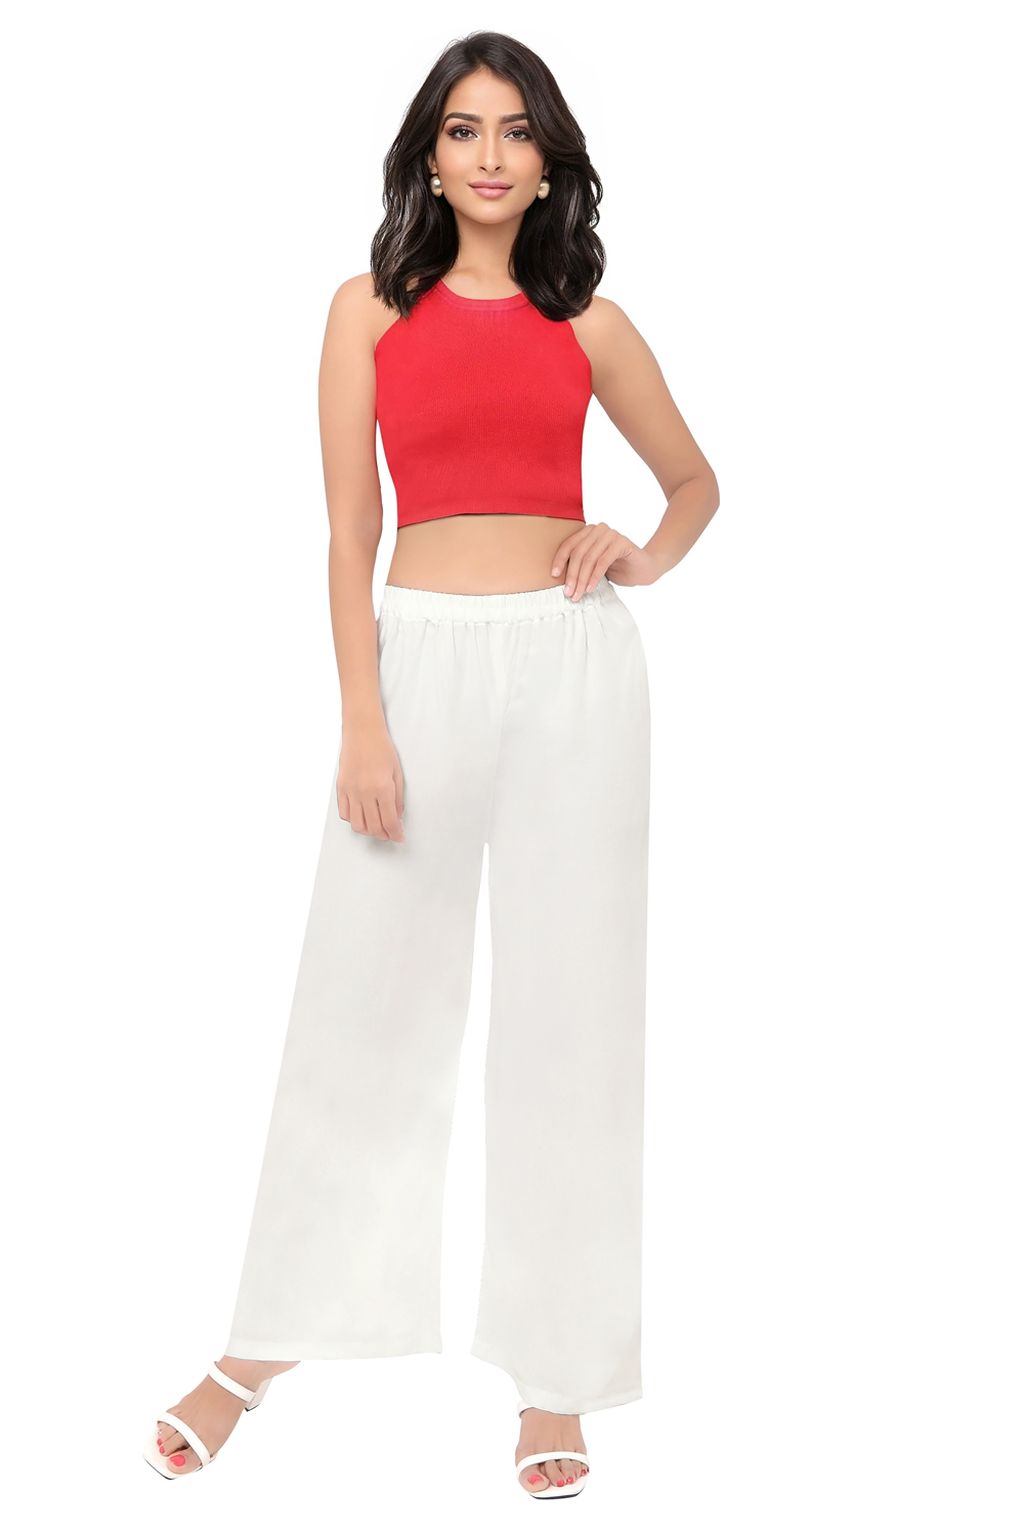 Buy White Trousers & Pants for Women by RATAN Online | Ajio.com